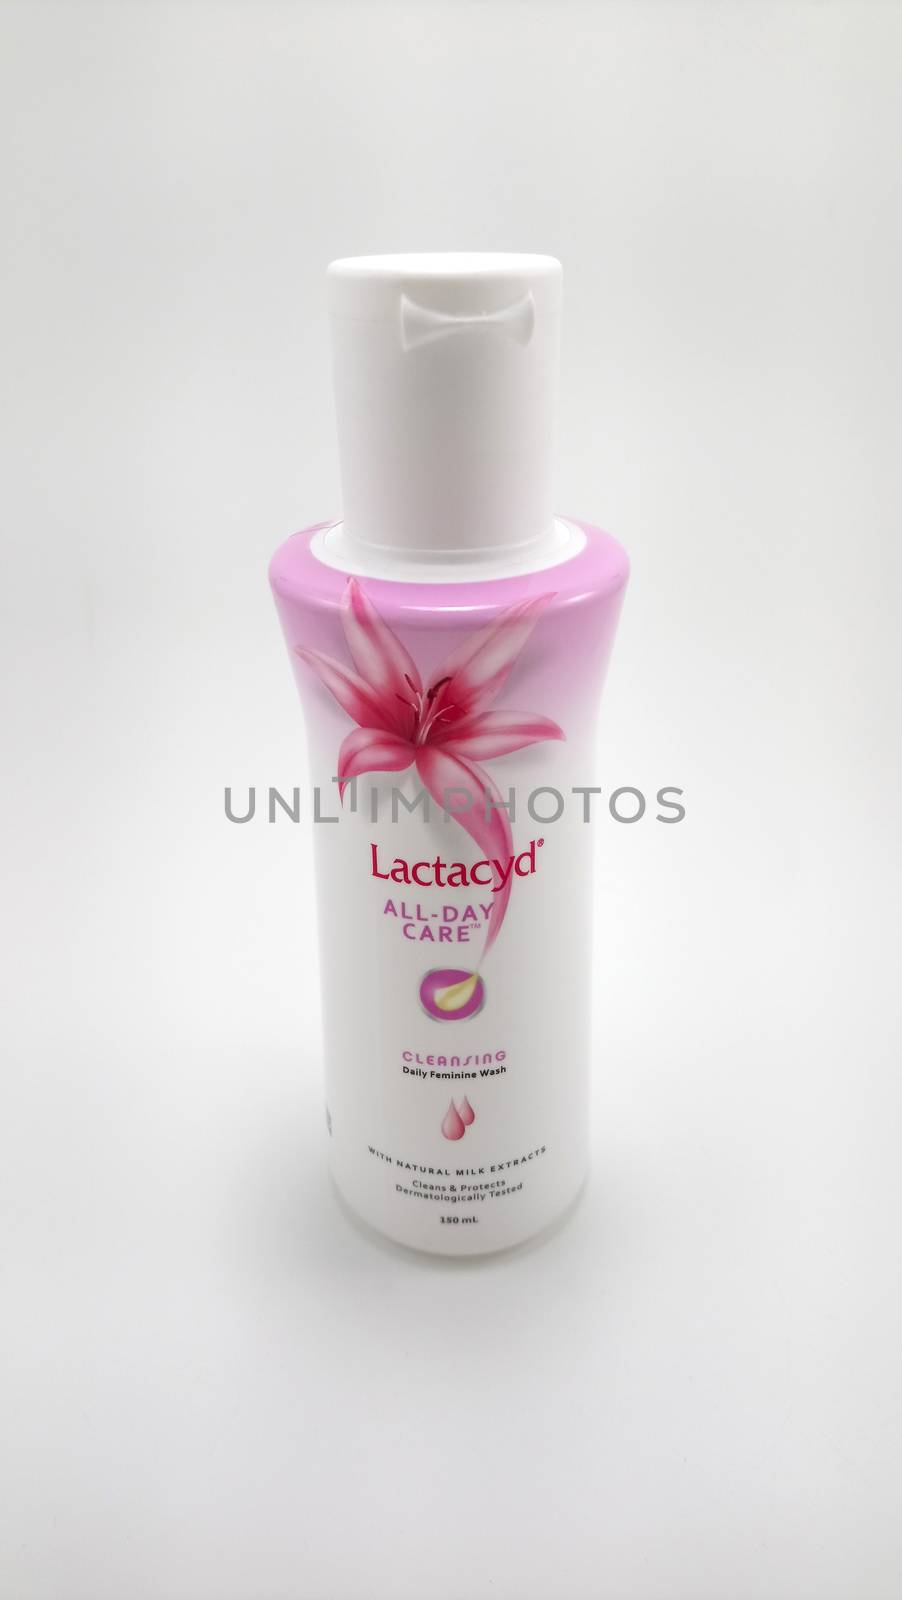 Lactacyd all day care cleansing daily feminine wash in Manila, P by imwaltersy